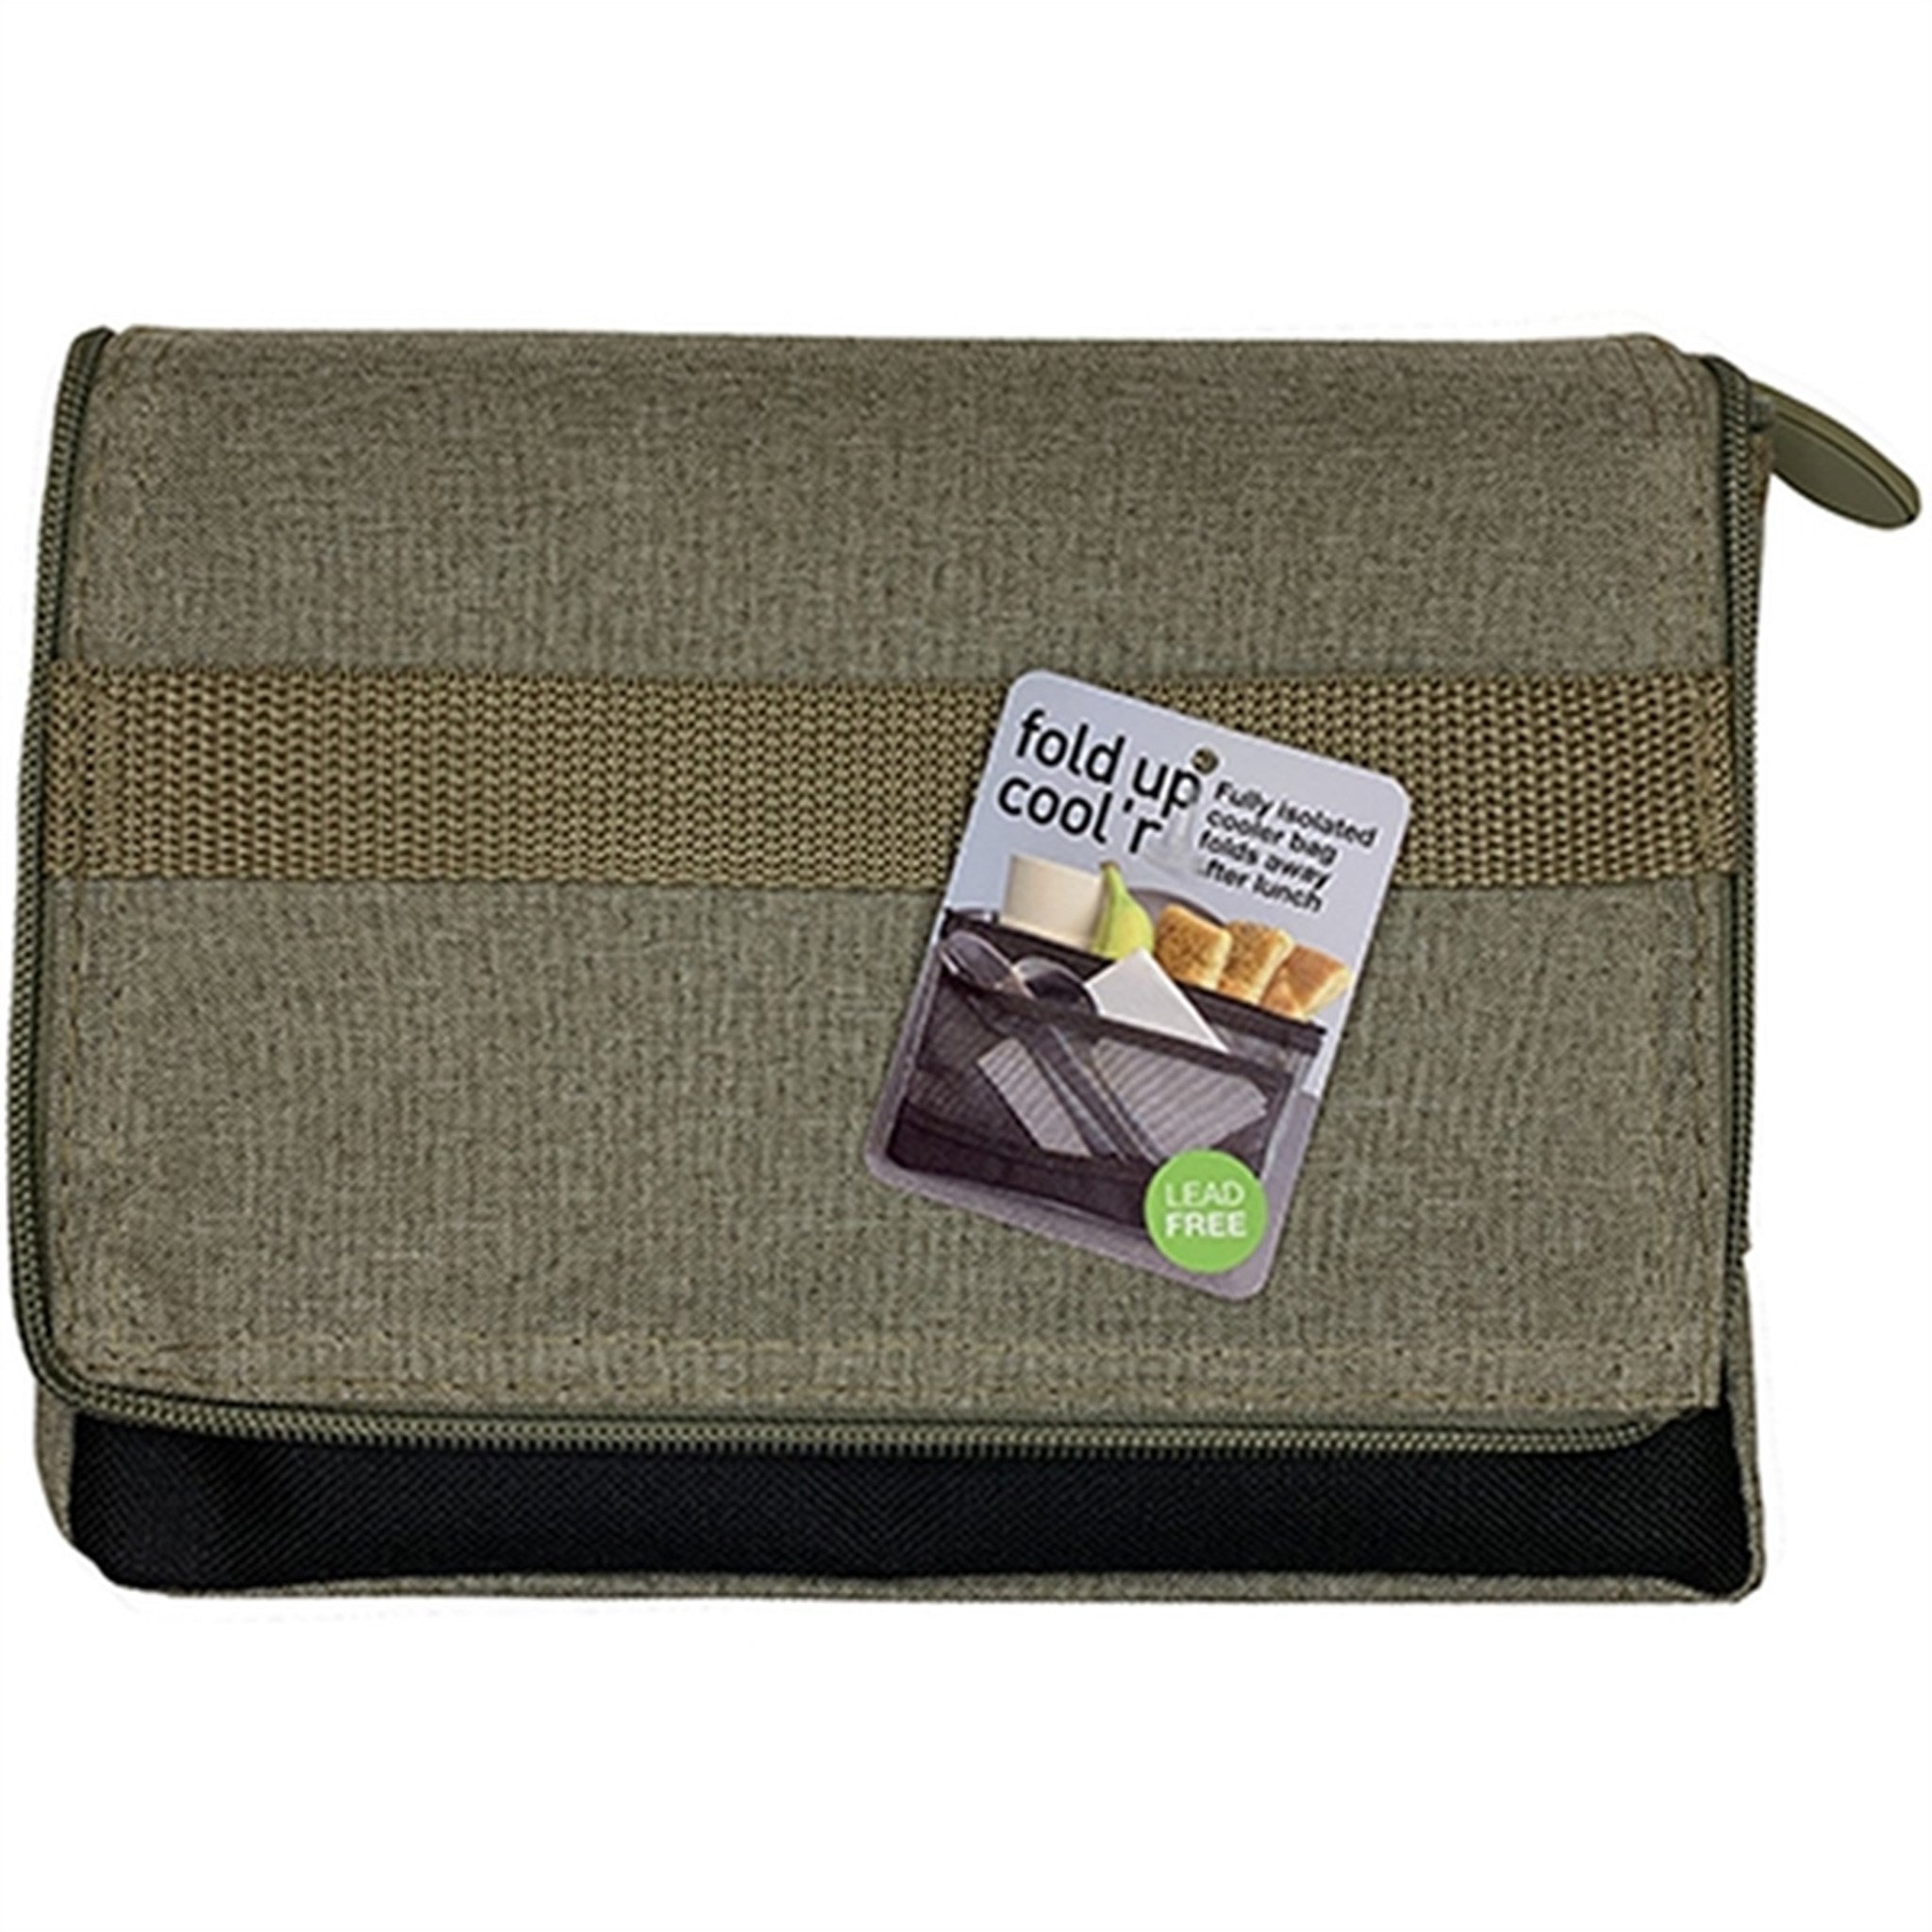 Sistema To Go Cool'r Maxi Fold Up Coolers 4 L Dusty Green